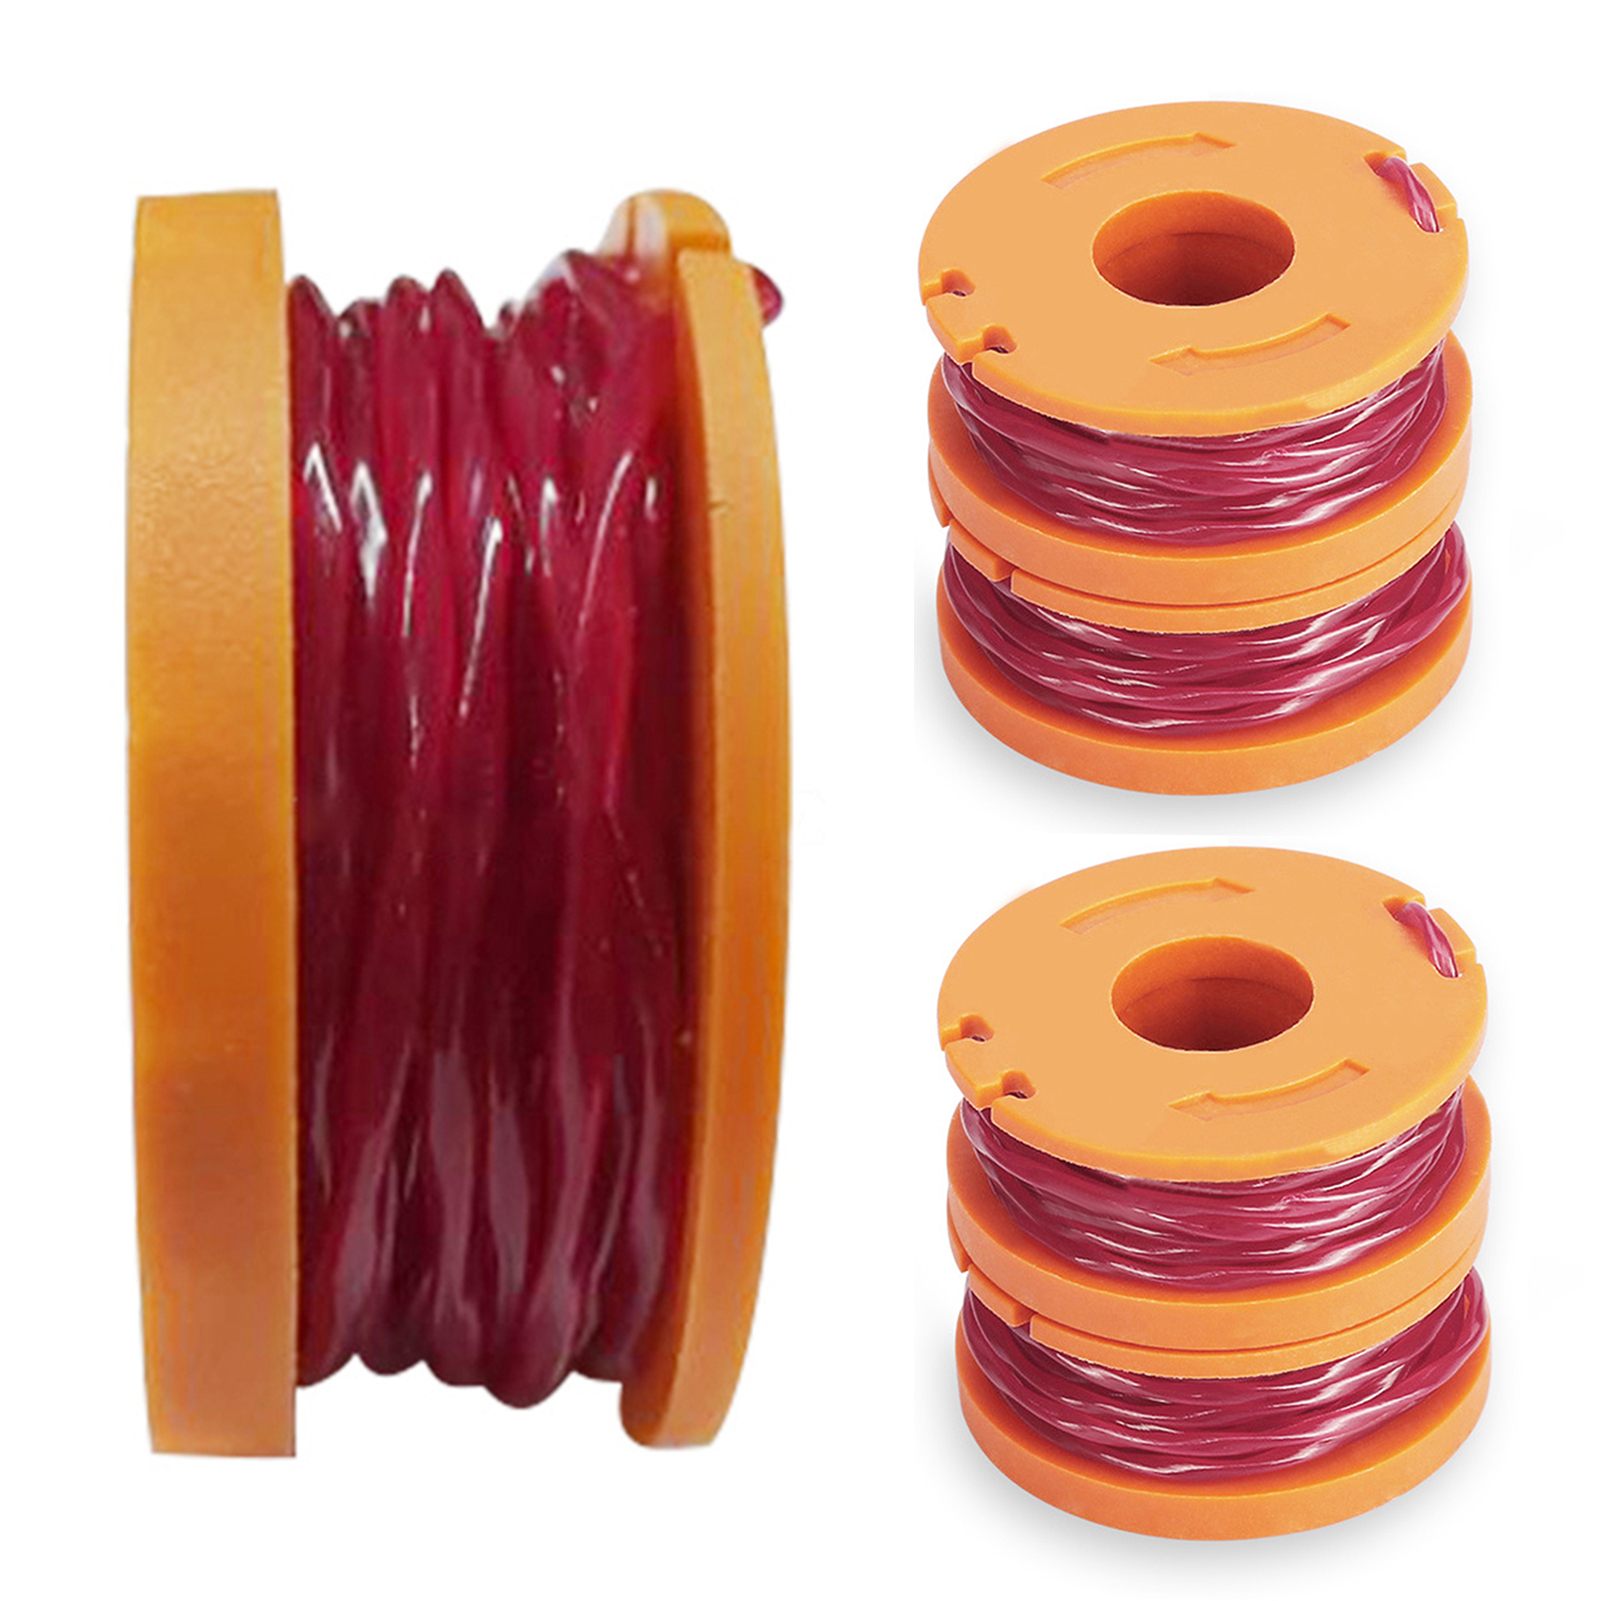 Visland 6PCS Trimmer Spool Line for Worx WA0010,Edger Spool Weed Wacker Spool Replacement Parts,Trimmer Line Refills 0.065 inch for Electric String Trimmer - image 3 of 8